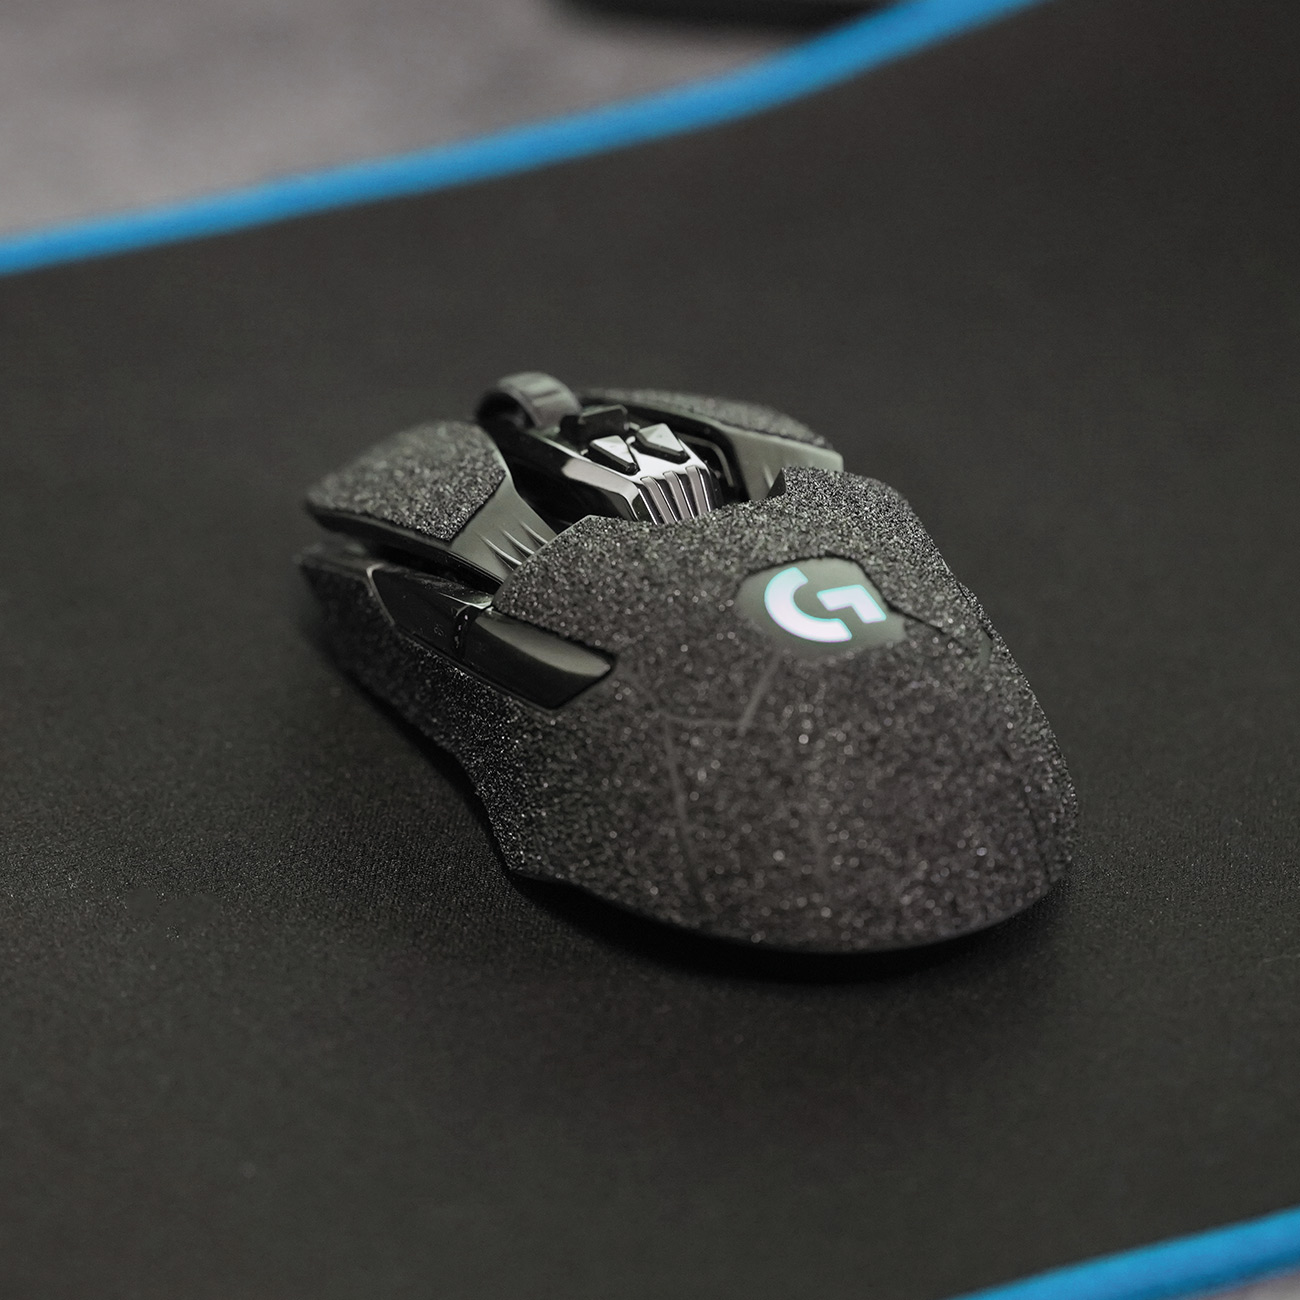 Logitech G903 Antgrip • Antgrip - Upgrade your gaming mouse.